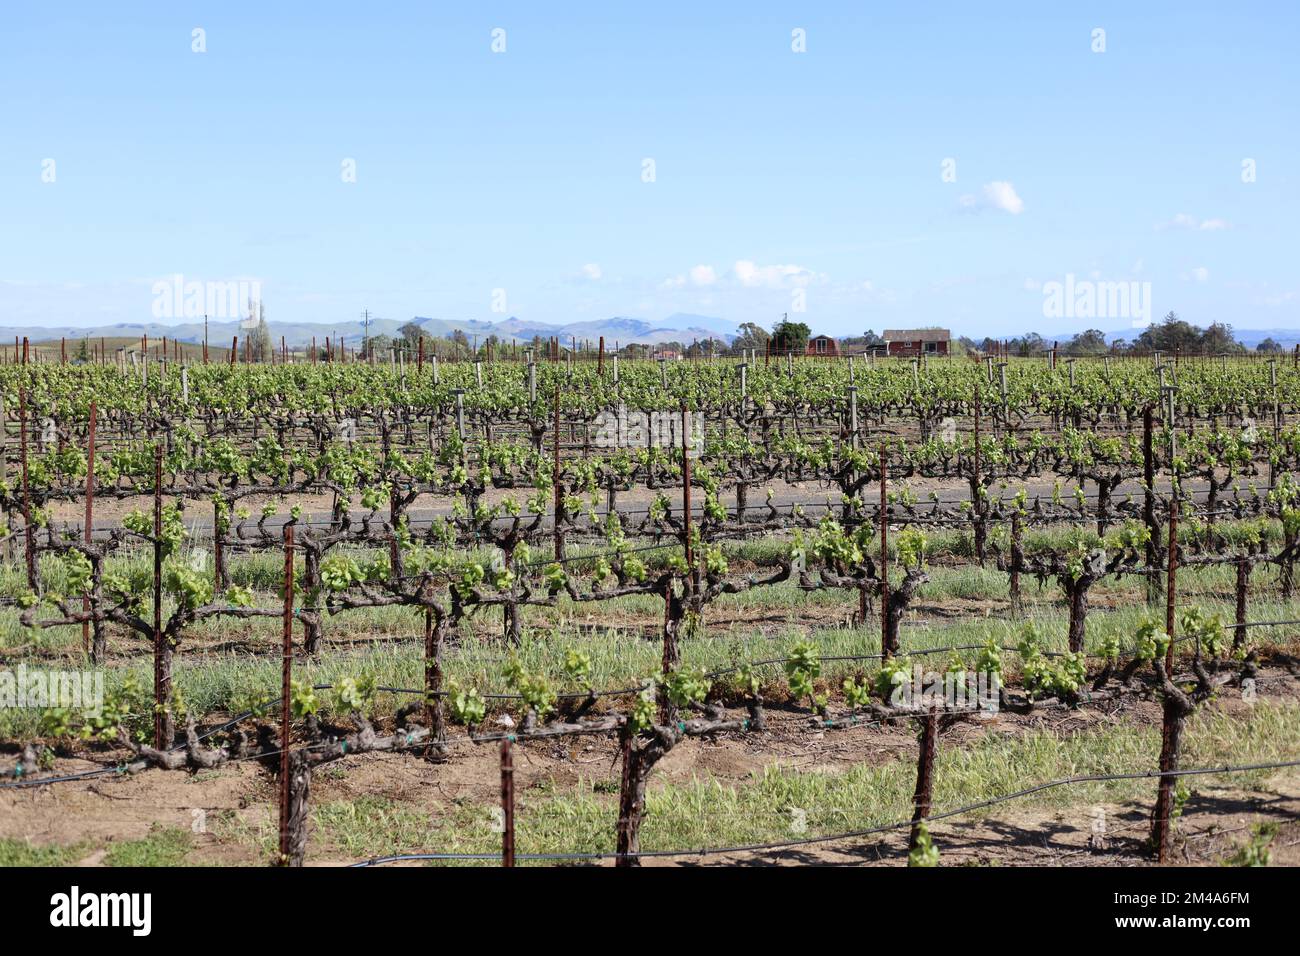 delicious winetasting in napa valley california with view on the vinyards Stock Photo